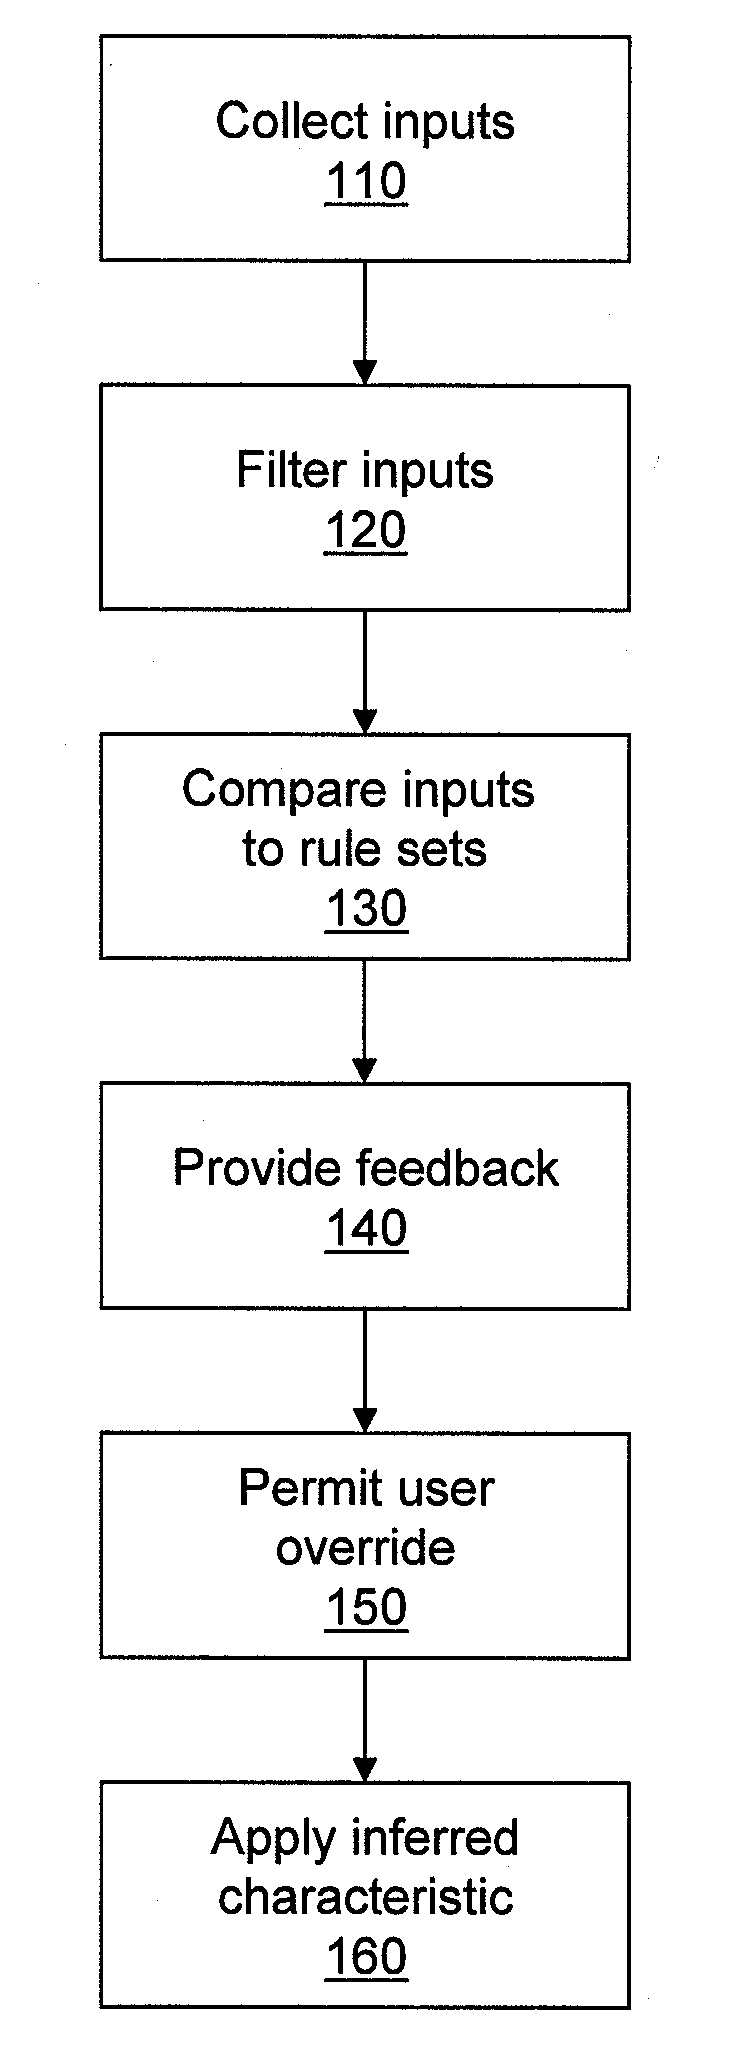 System and method to modify avatar characteristics based on inferred conditions